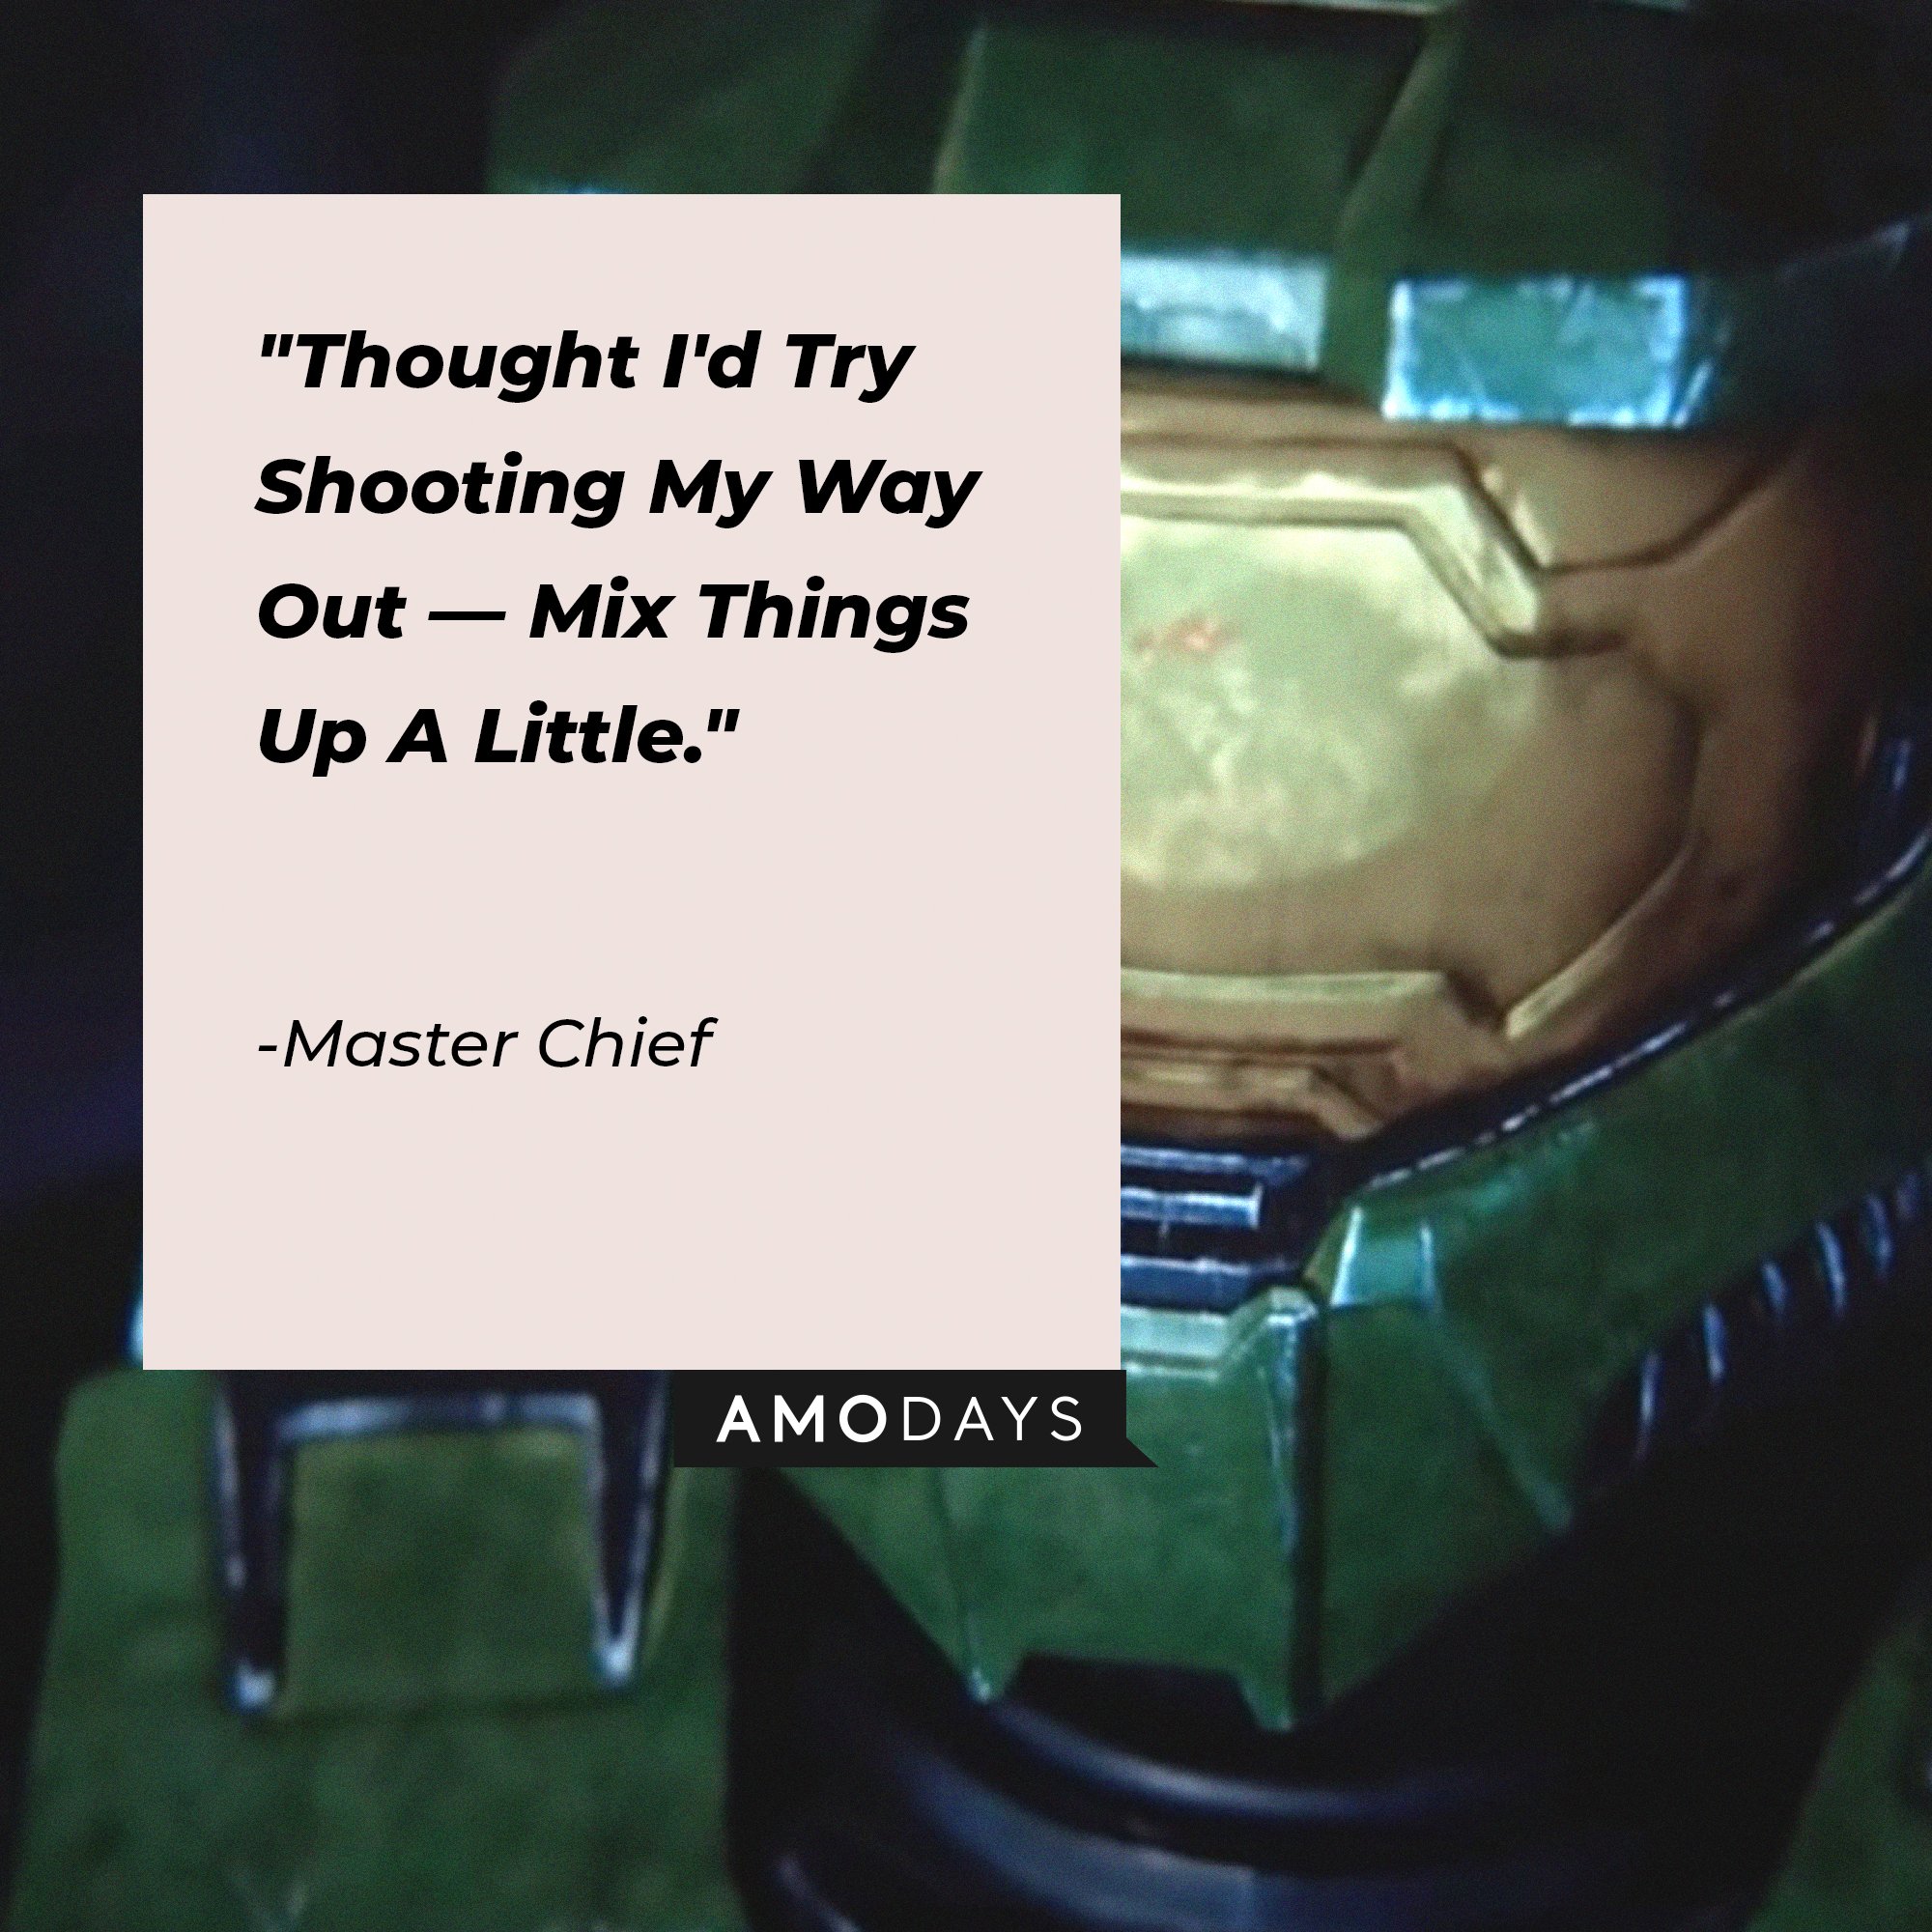 Master Chief's quote: "Thought I'd Try Shooting My Way Out—Mix Things Up A Little." | Image: AmoDays